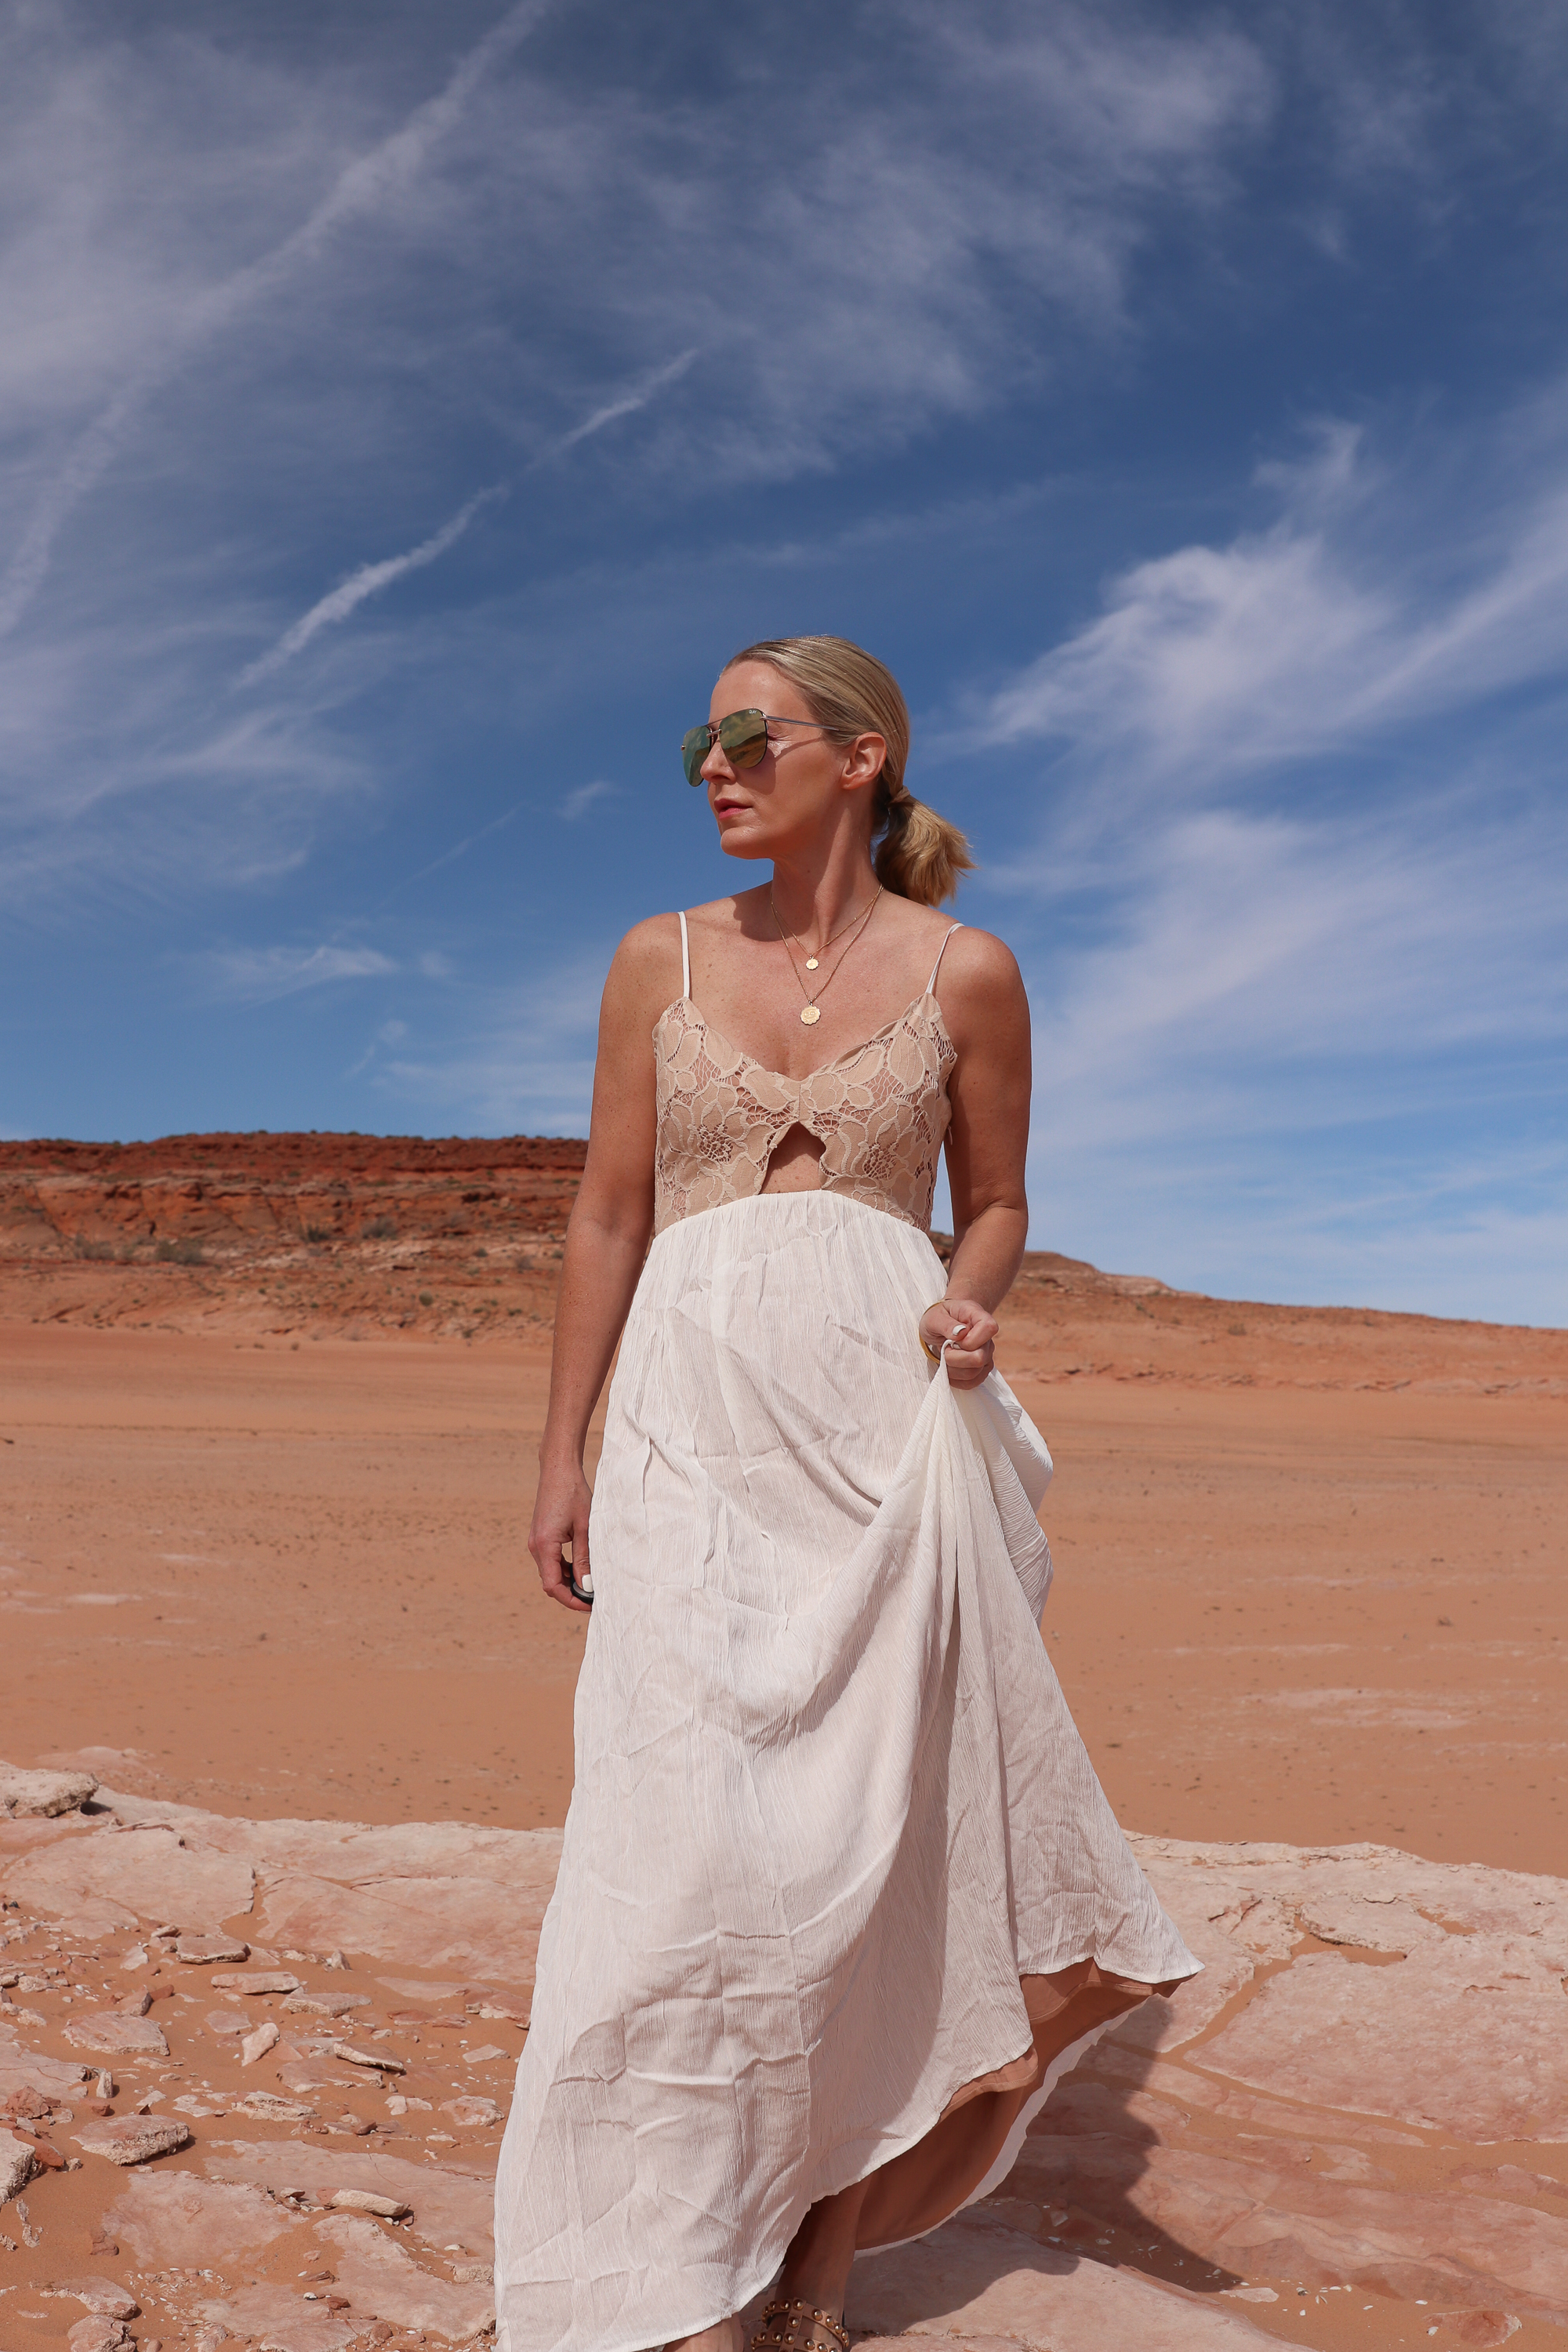 Maxi Dresses, Fashion blogger Erin Busbee of BusbeeStyle.com wearing a lace and cotton maxi dress by Tularosa with Sam Edelman sandals at Lake Powell